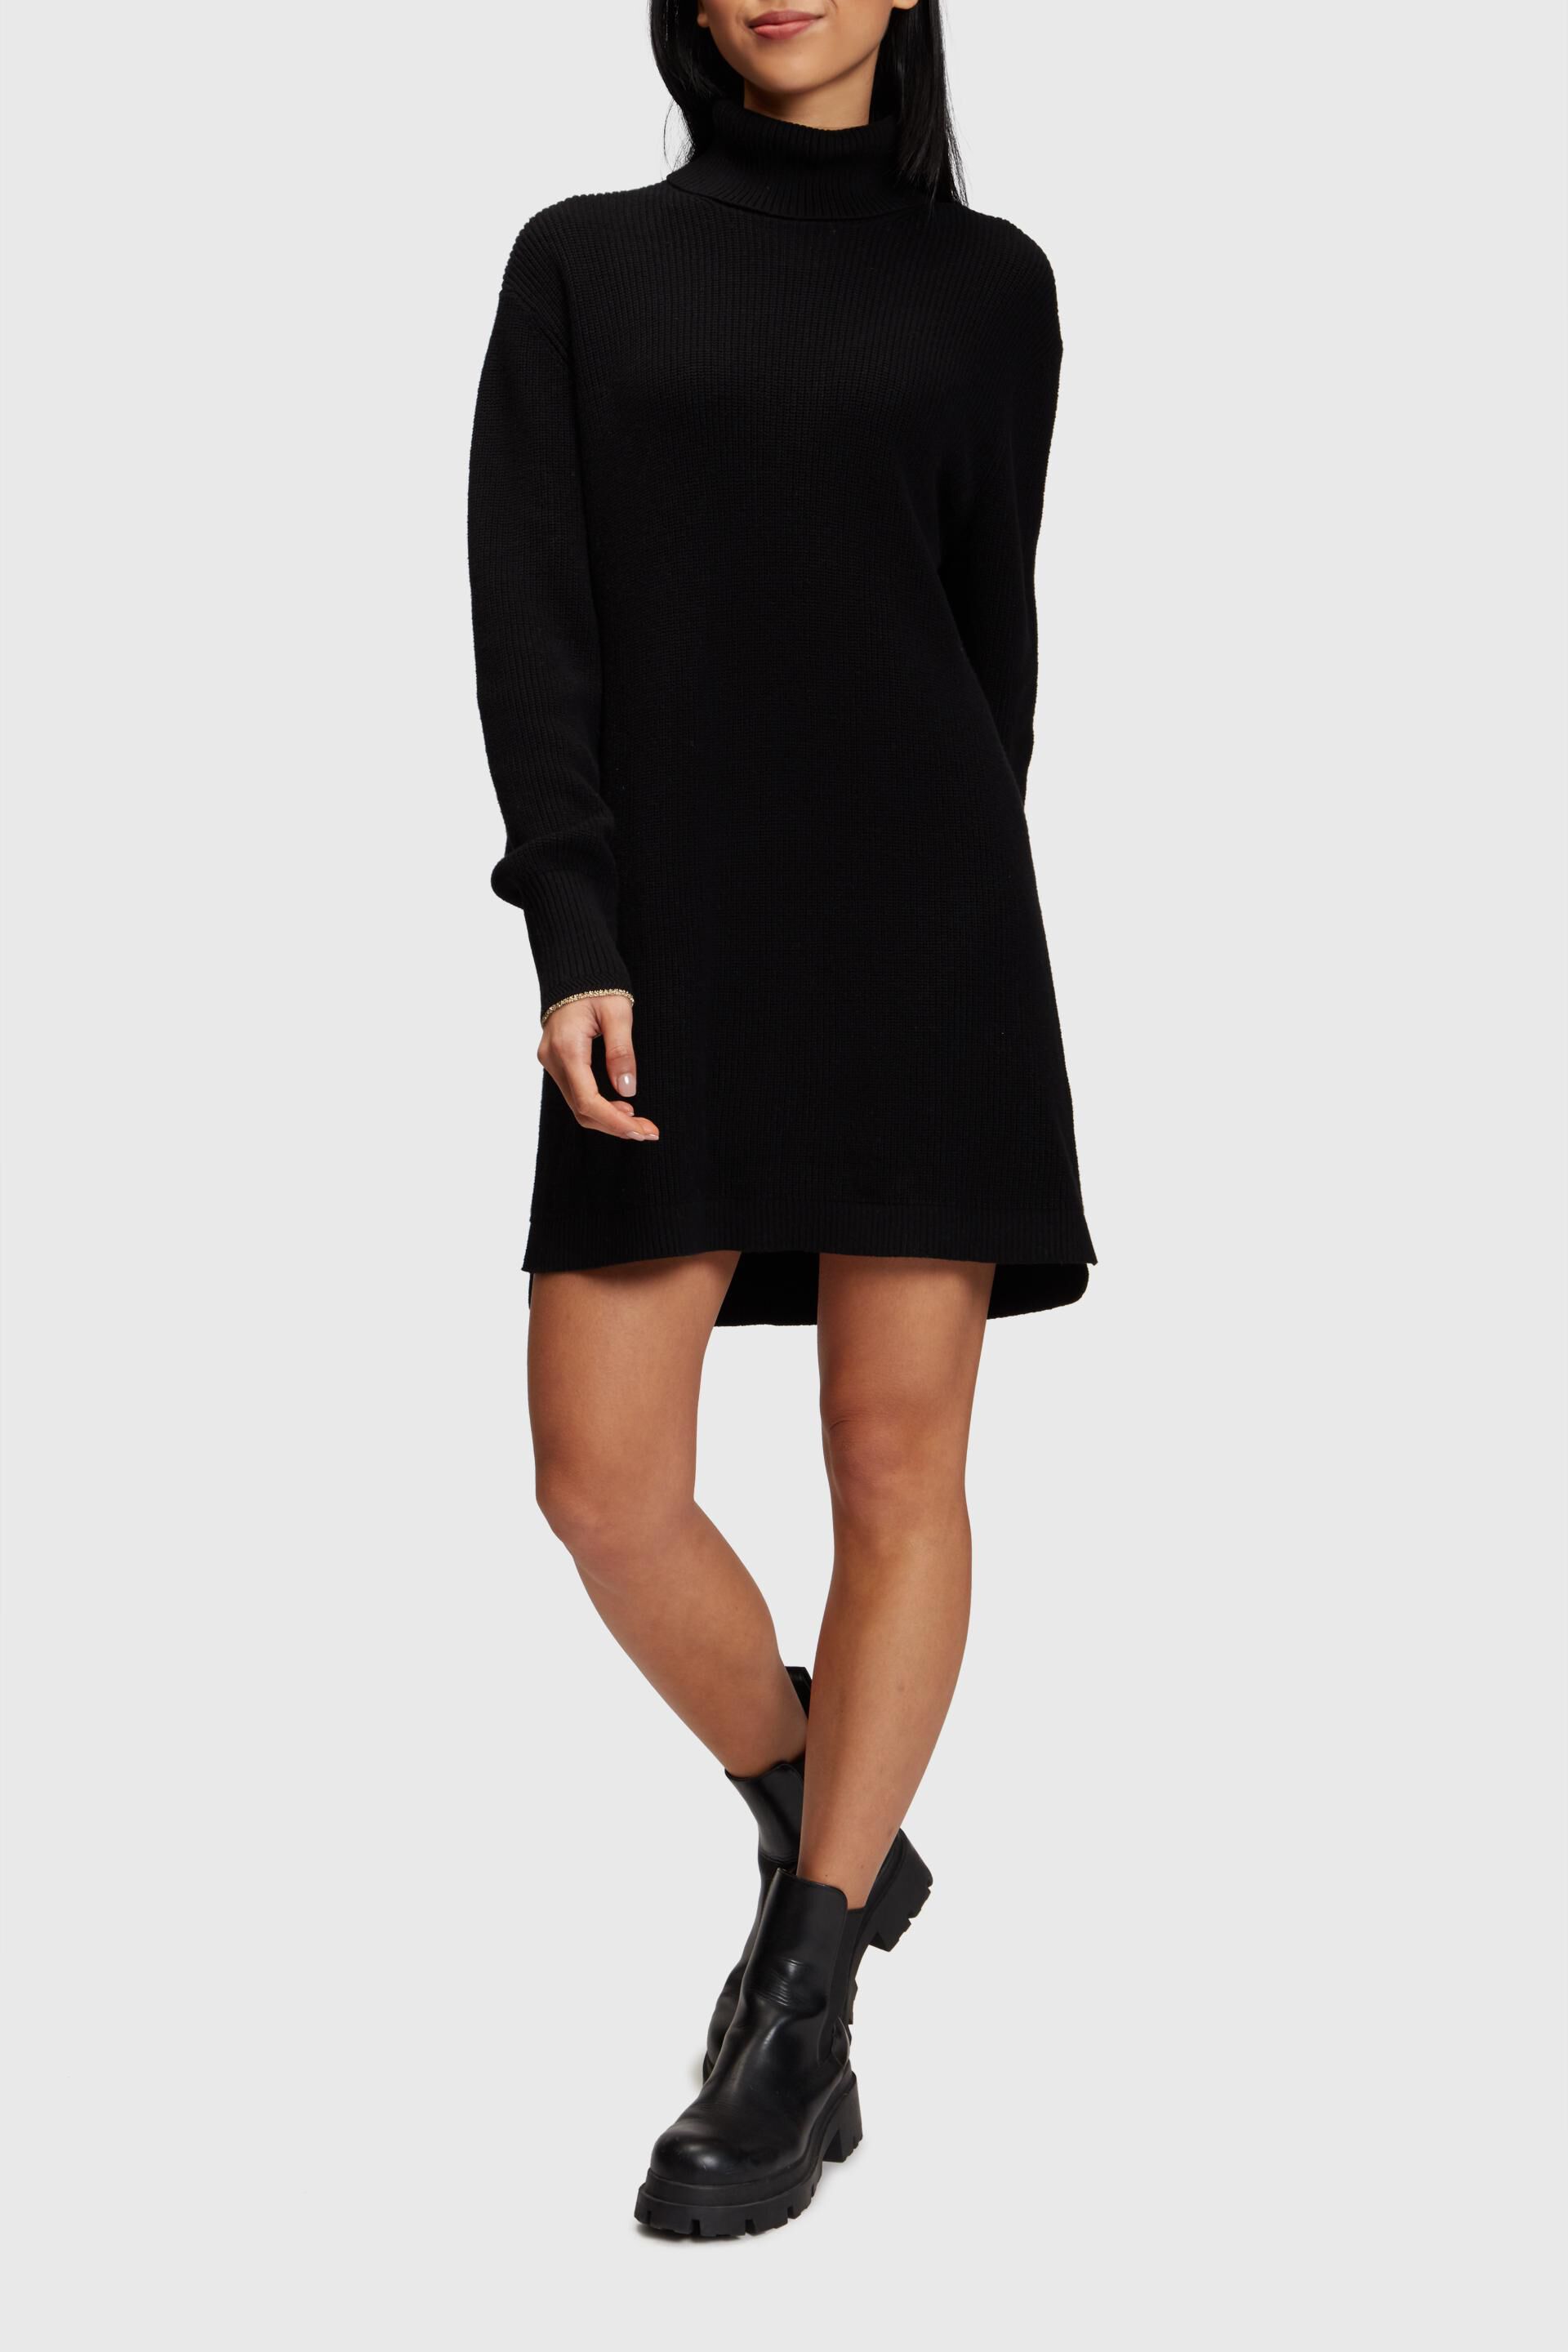 Esprit turtleneck with Knitted dress cashmere